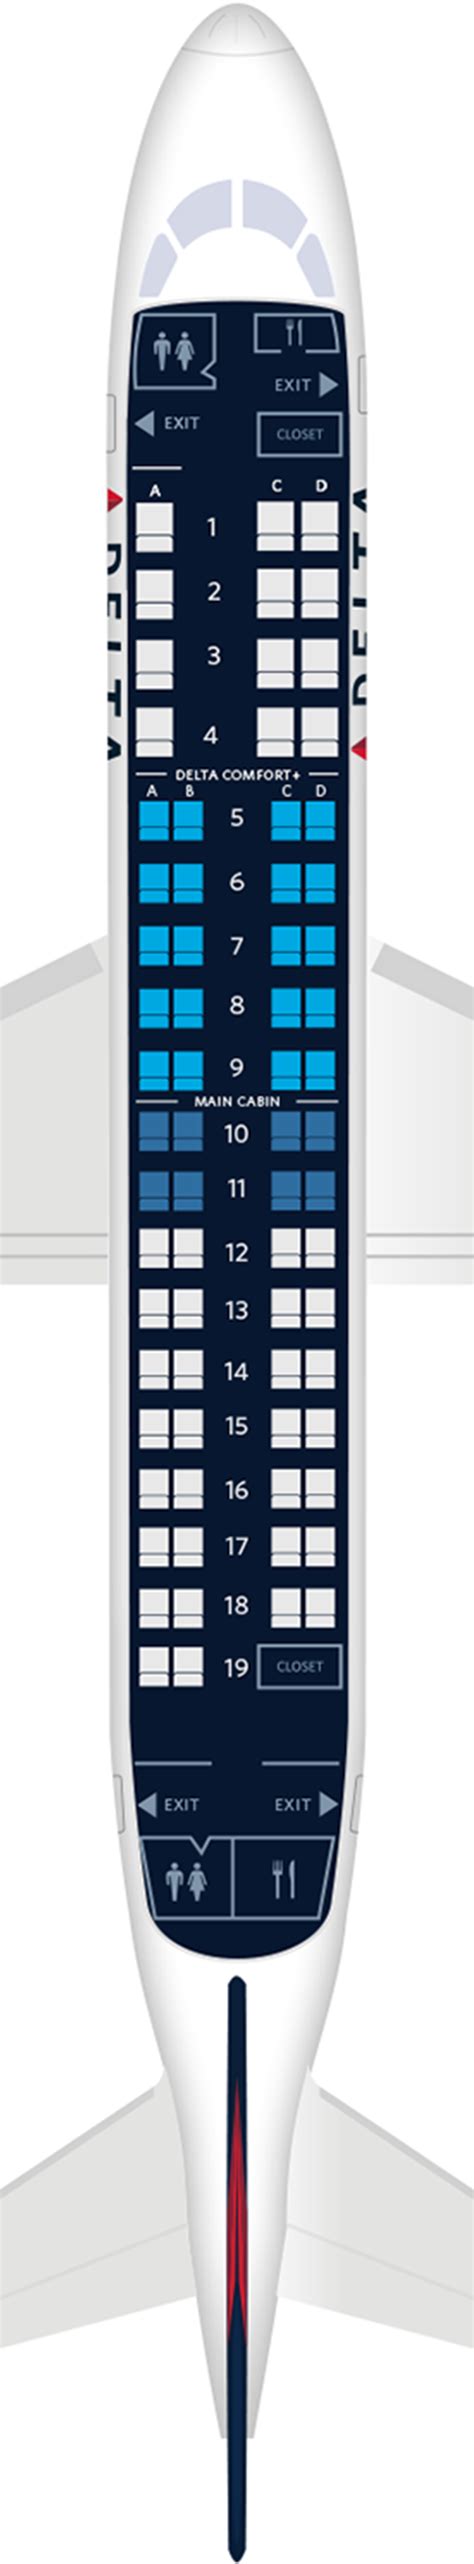 Embraer e 175 seat map. About the Embraer 175. Embraer 175s are the smallest aircraft in our fleet and are also known as “Cityhoppers.” The aircraft are mostly used for flights to destinations within Europe. Examples are Turin, Graz, and Stuttgart, depending on the season. The Embraers, unlike the other aircraft in our fleet, are not named. 